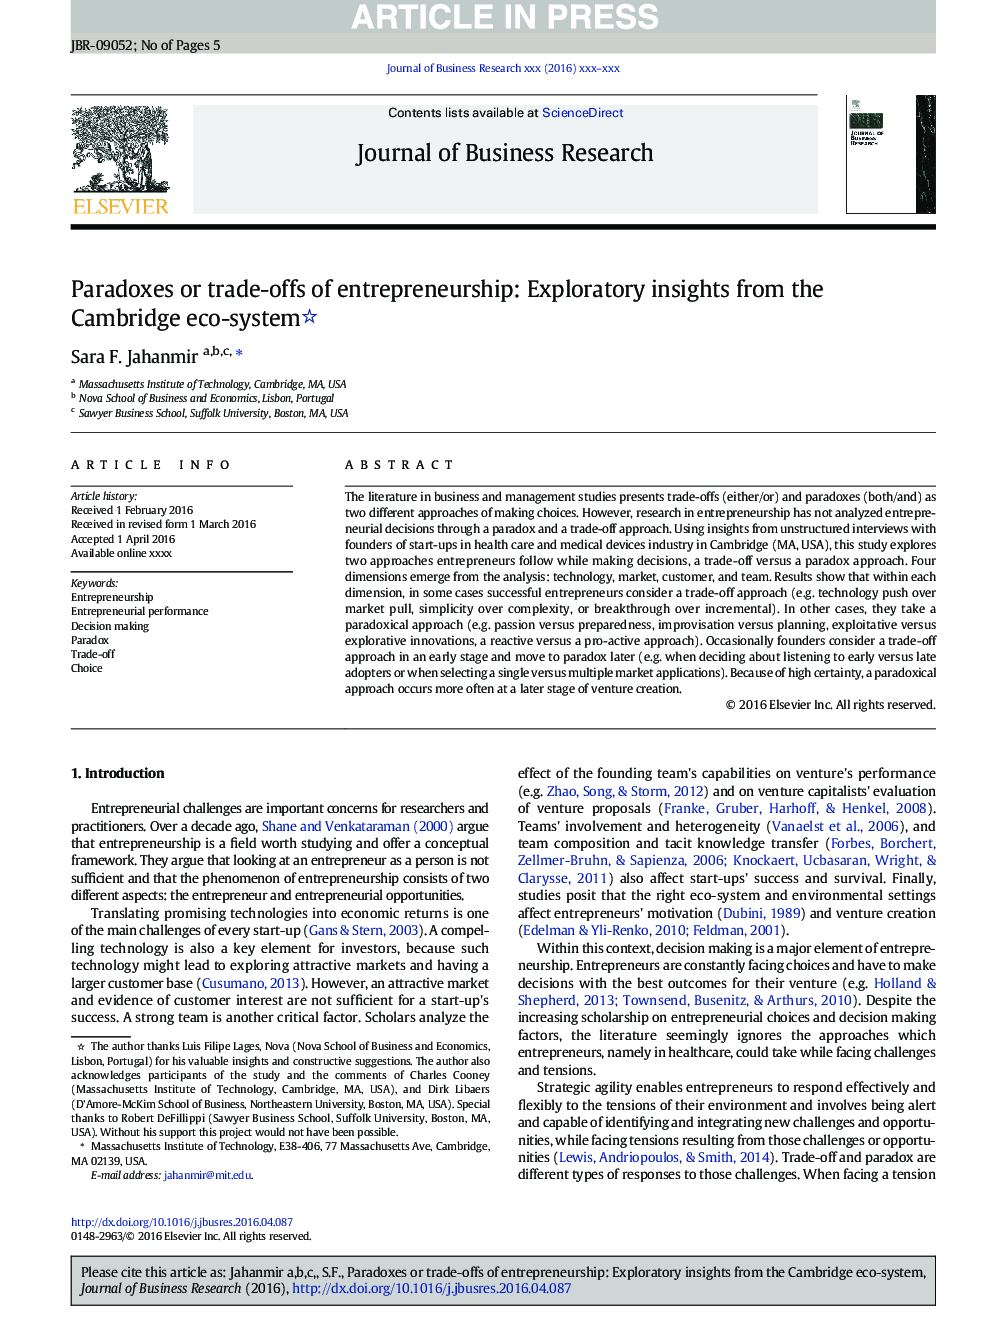 Paradoxes or trade-offs of entrepreneurship: Exploratory insights from the Cambridge eco-system